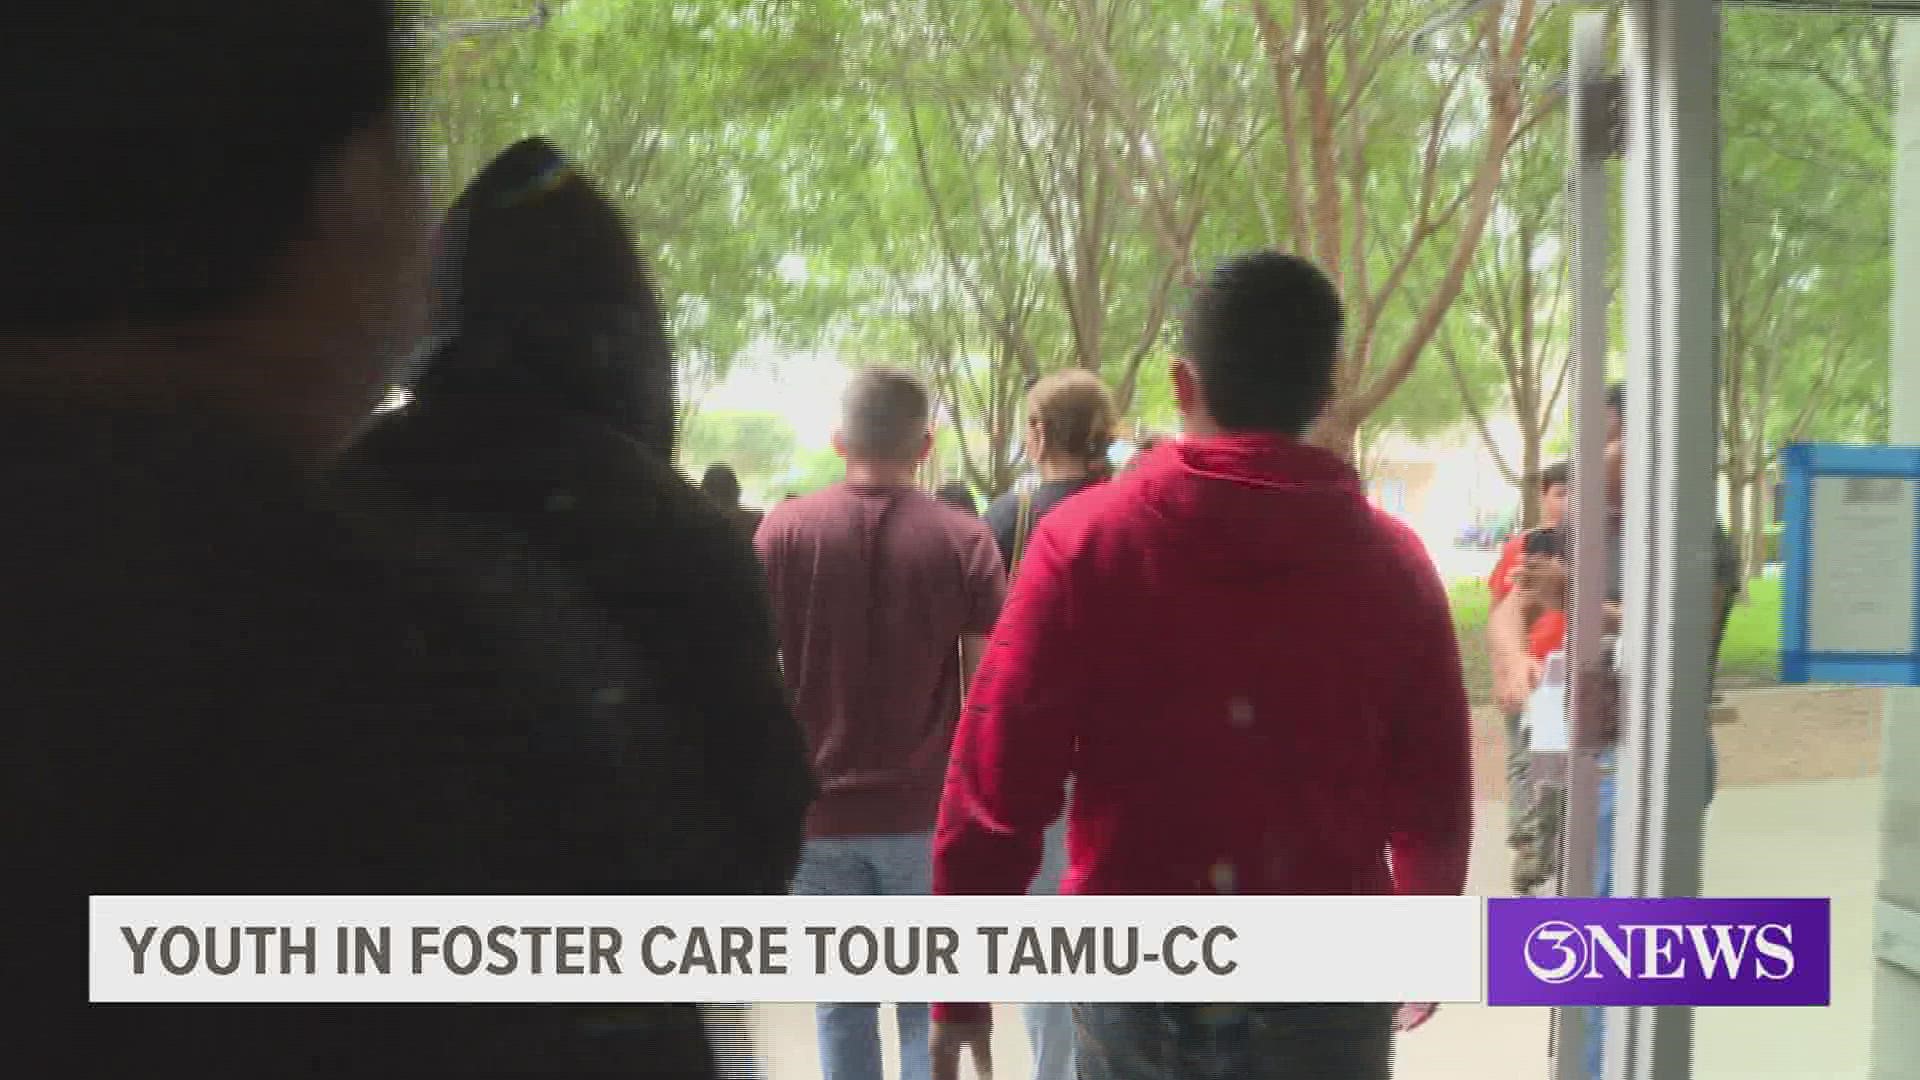 Youths aging out of the foster care system were given a chance to tour Texas A&M University - Corpus Christi for a glimpse into their possible futures.